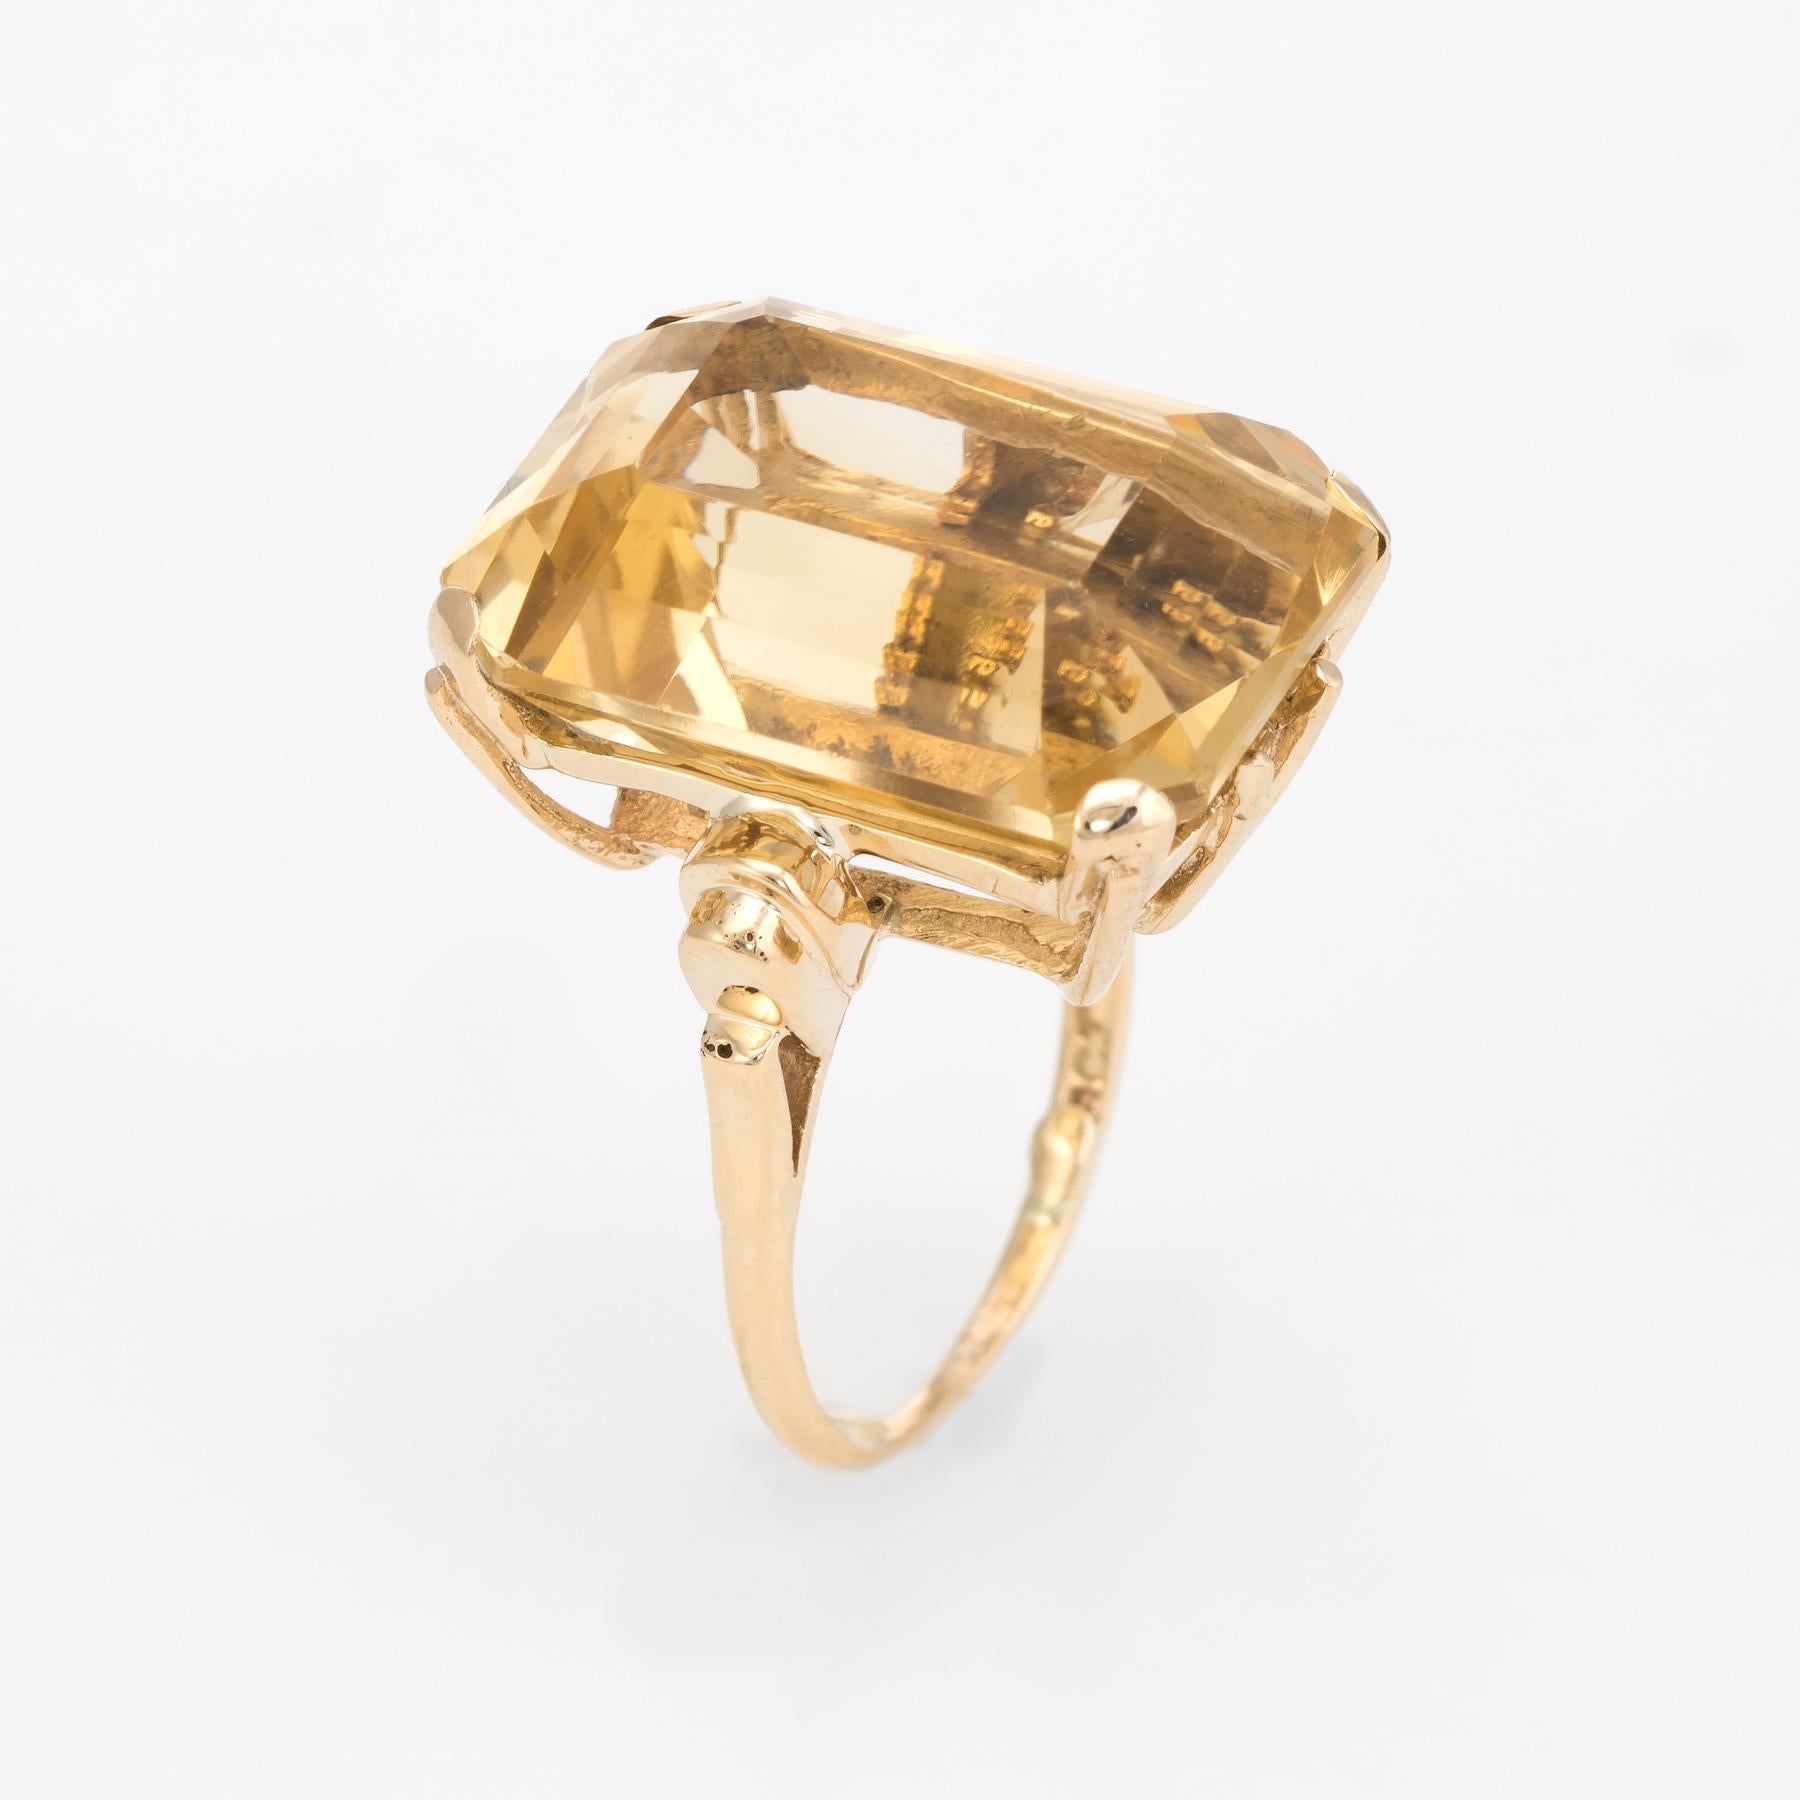 Dramatic large vintage statement cocktail ring (circa 1950s to 1960s), crafted in 9k karat yellow gold. 

Centrally mounted emerald cut citrine measures 20mm x 15mm (estimated at 25 carats). The citrine is in excellent condition and free of cracks